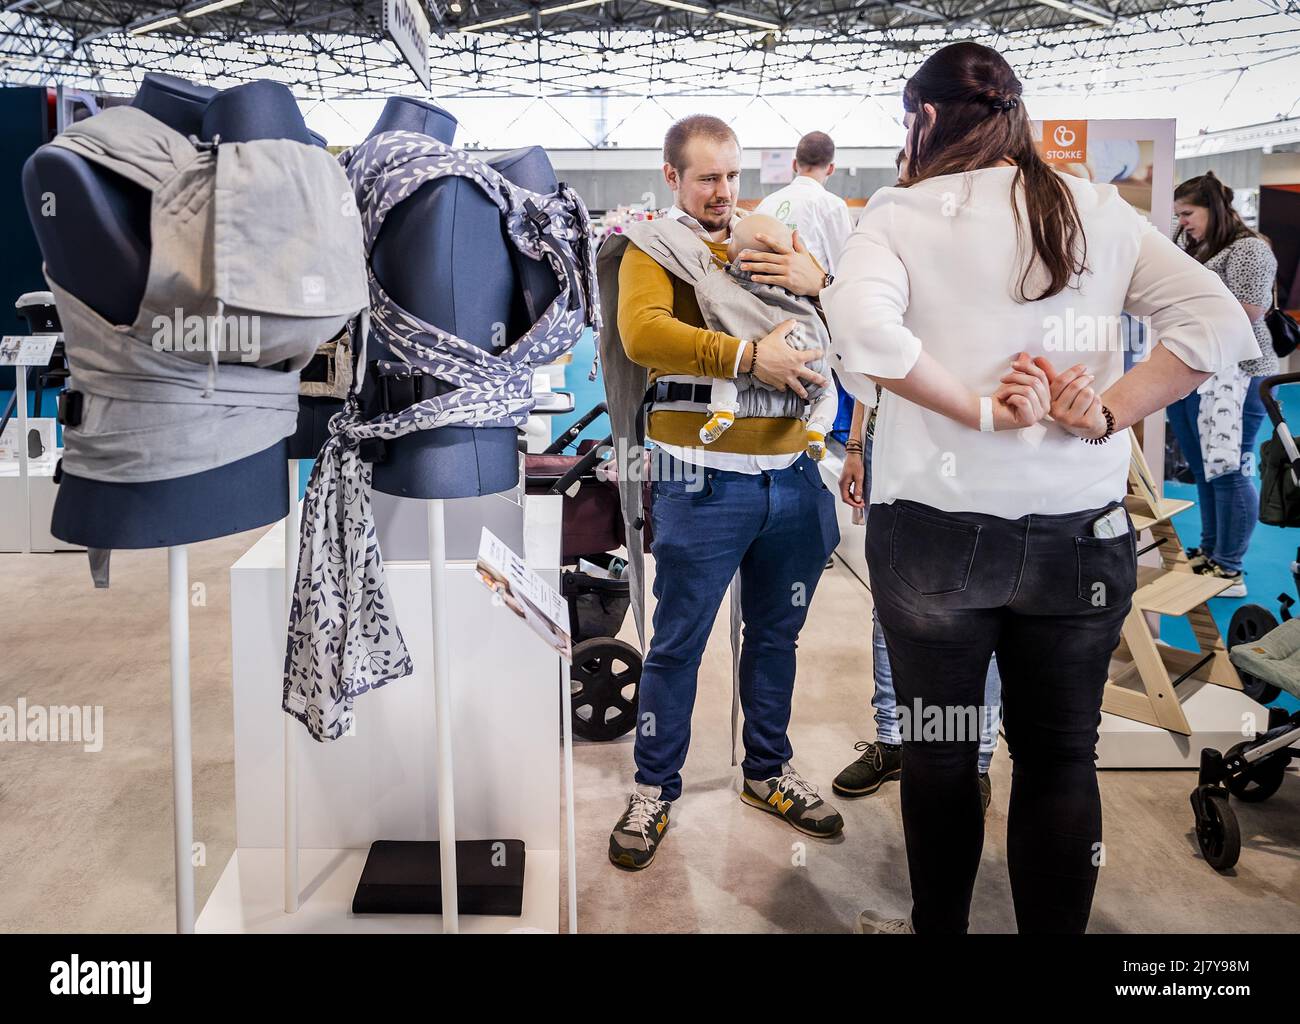 2022-05-11 15:21:40 AMSTERDAM - Visitors test baby carriers on the first day of the Nine Months Fair in the RAI. It is the first time since the outbreak of the corona pandemic that the fair on pregnancy and babies is taking place again. REMKO DE WAAL netherlands out - belgium out Stock Photo